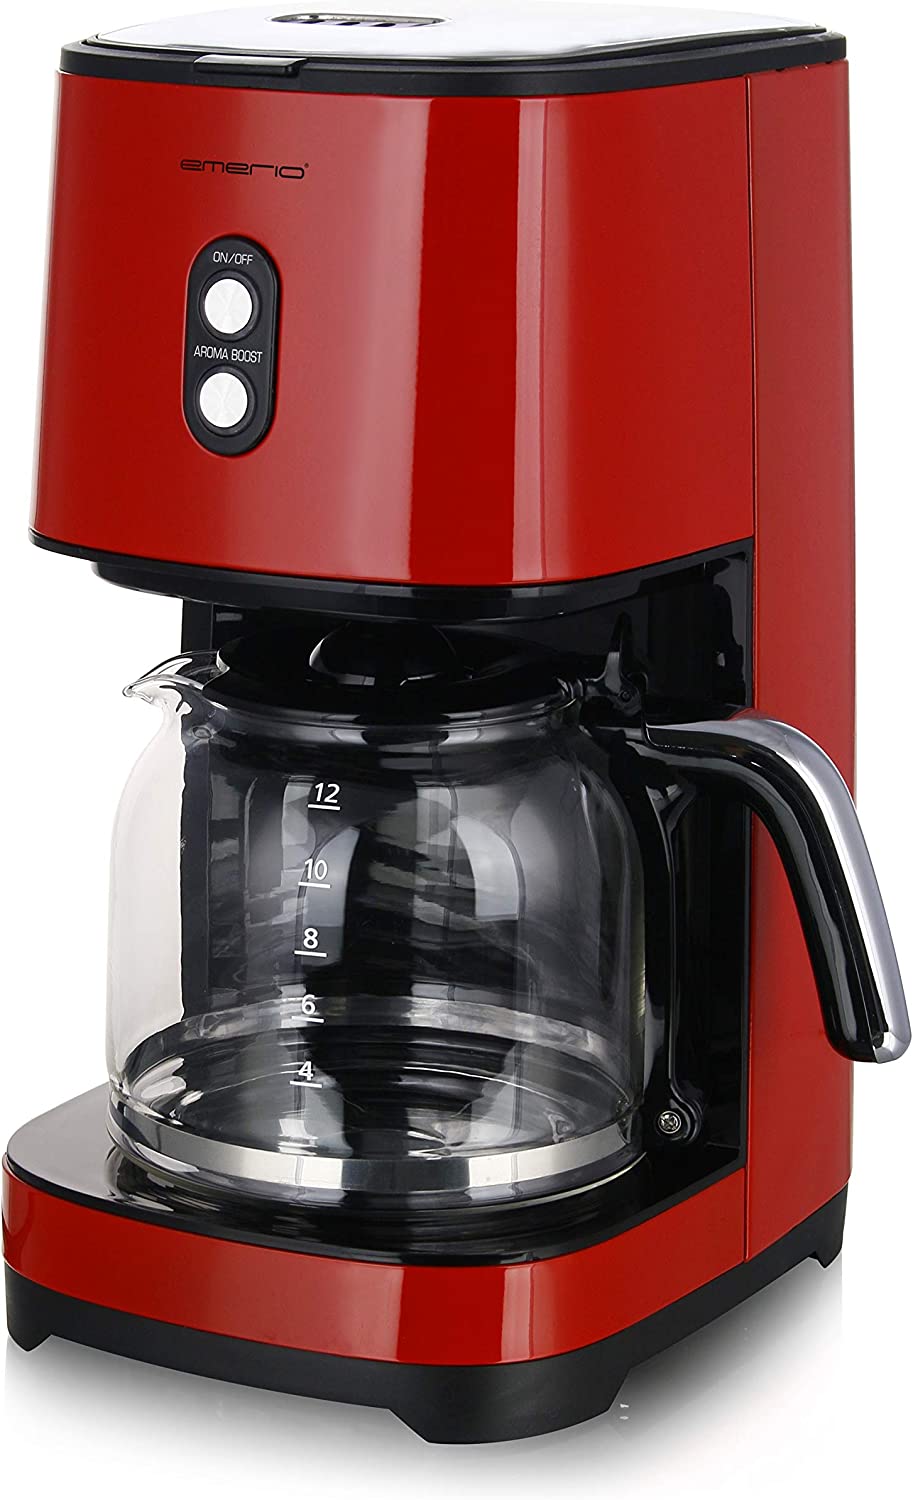 Emerio CME-121593.7 Filter Coffee Machine With Aroma Boost for Special Taste, Removable Permanent Filter, Retro Red